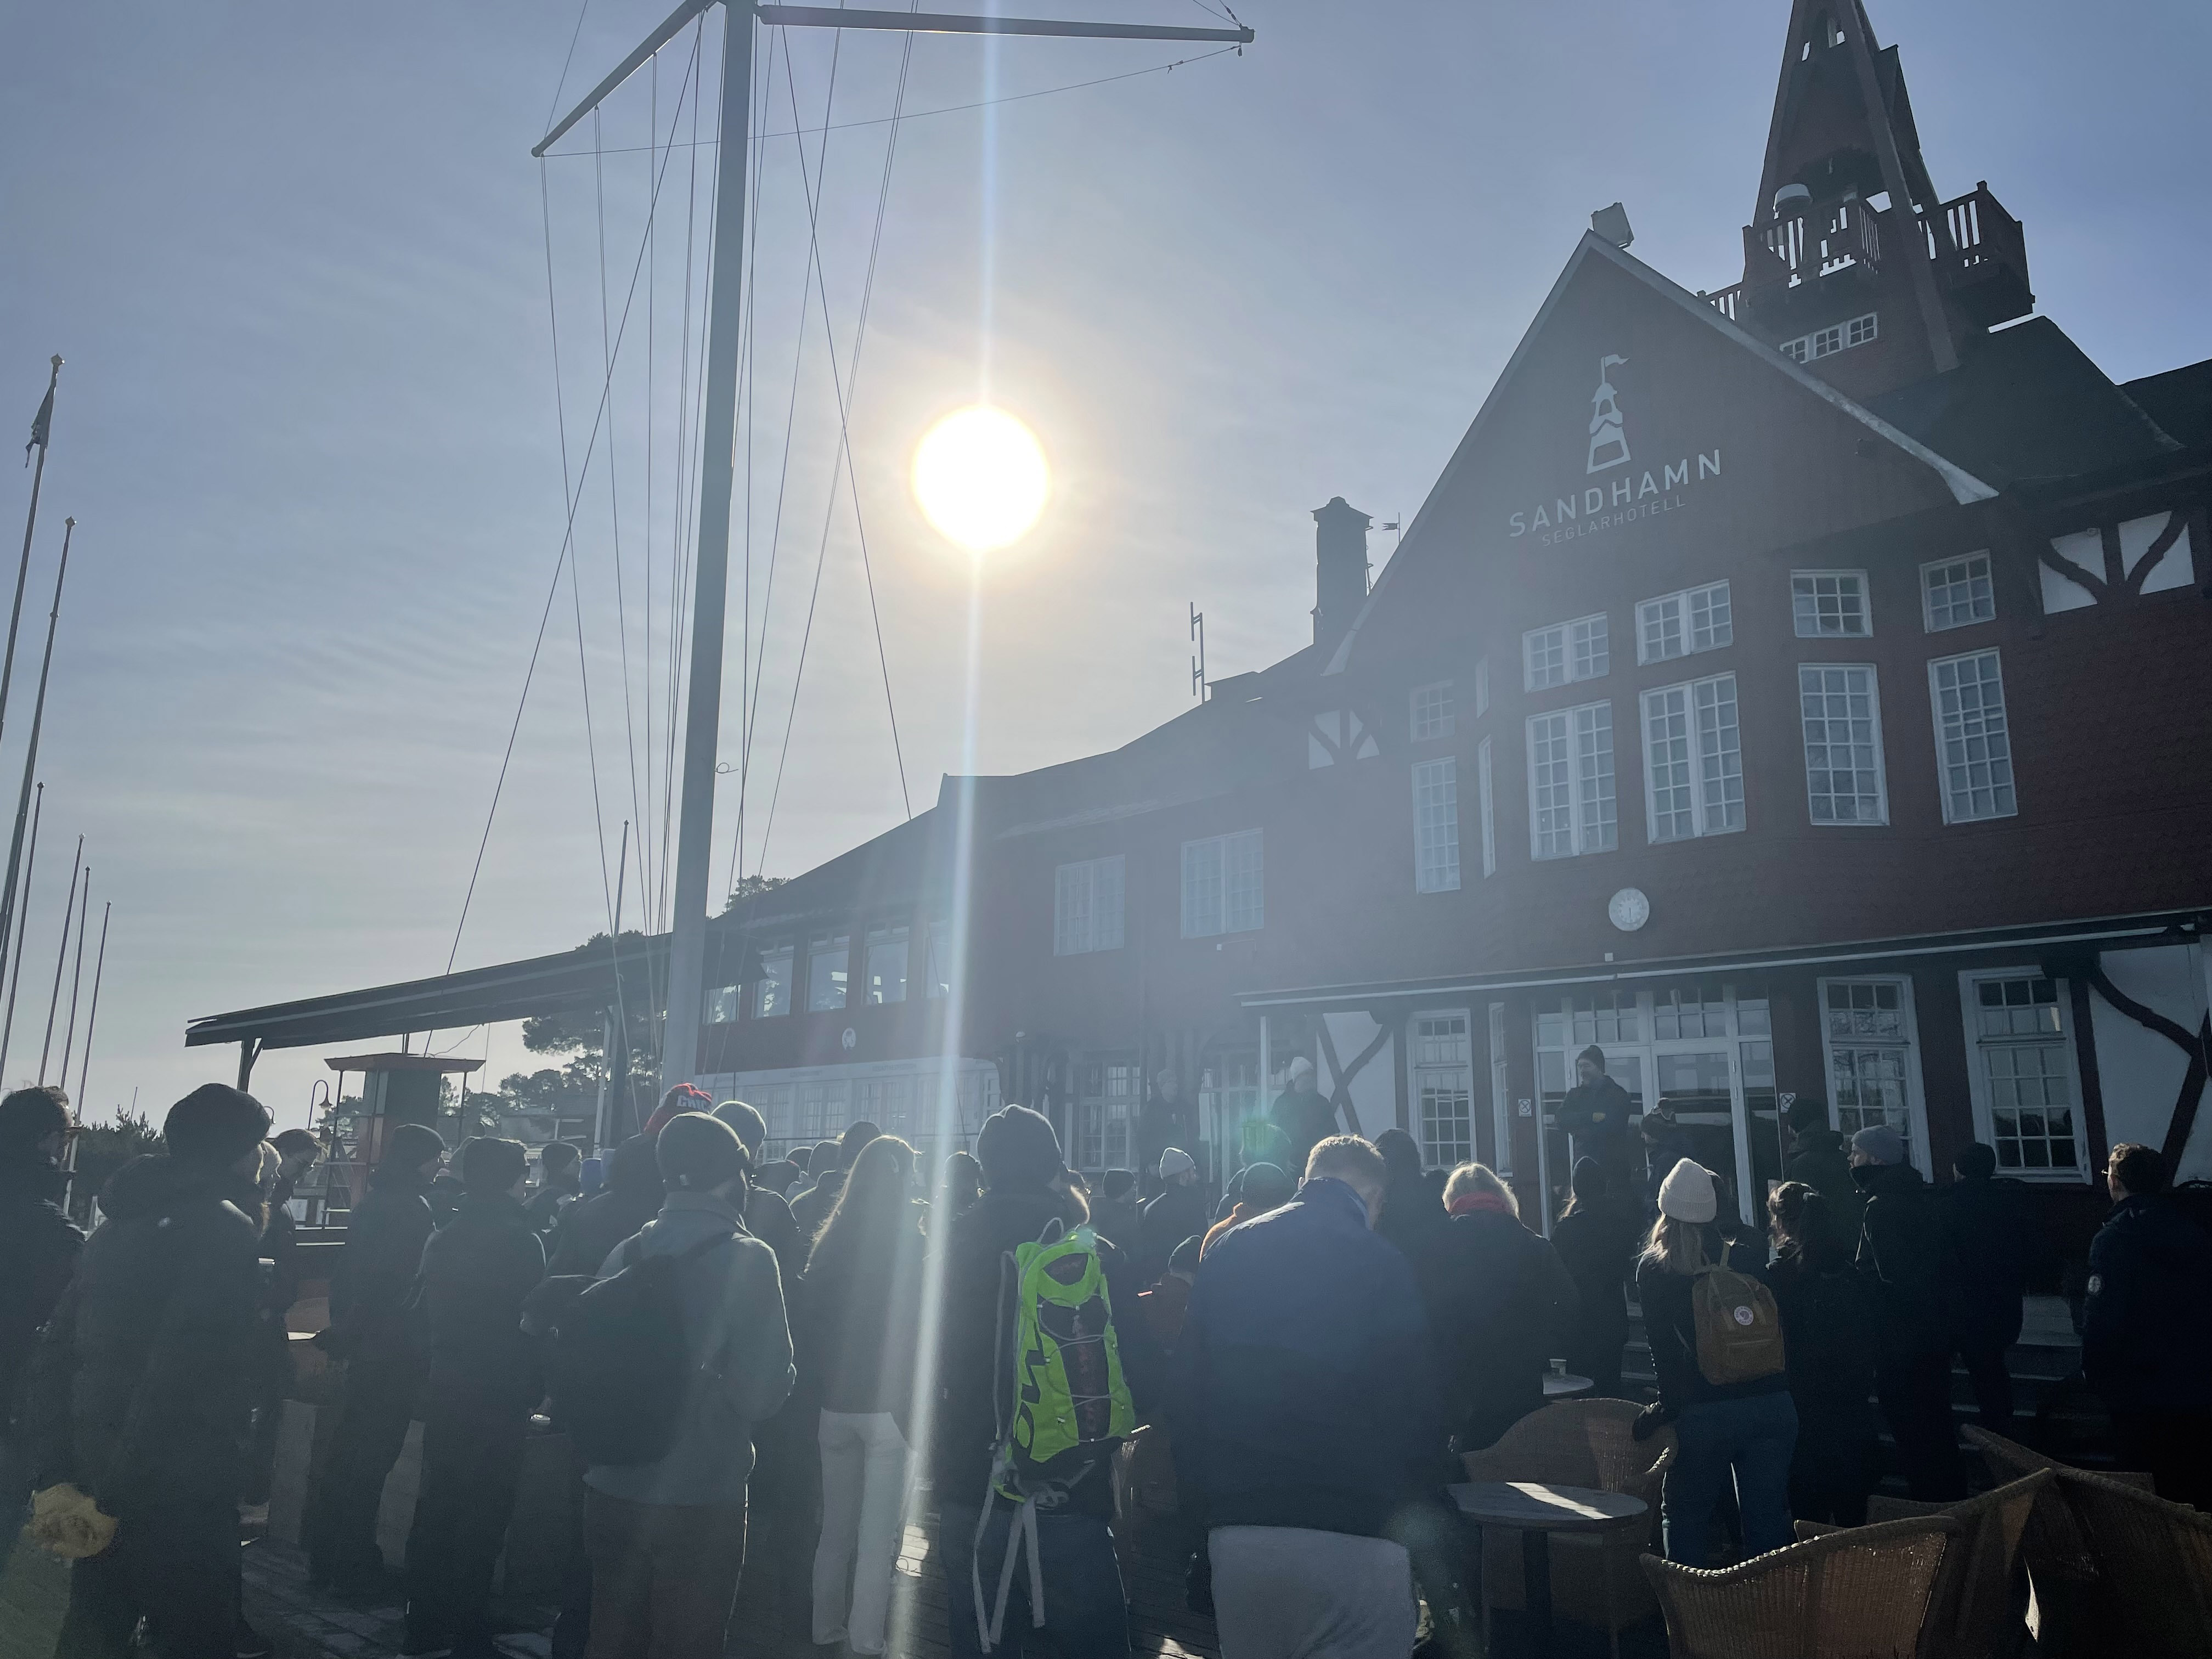 Peoples are standing out side of sandhamn